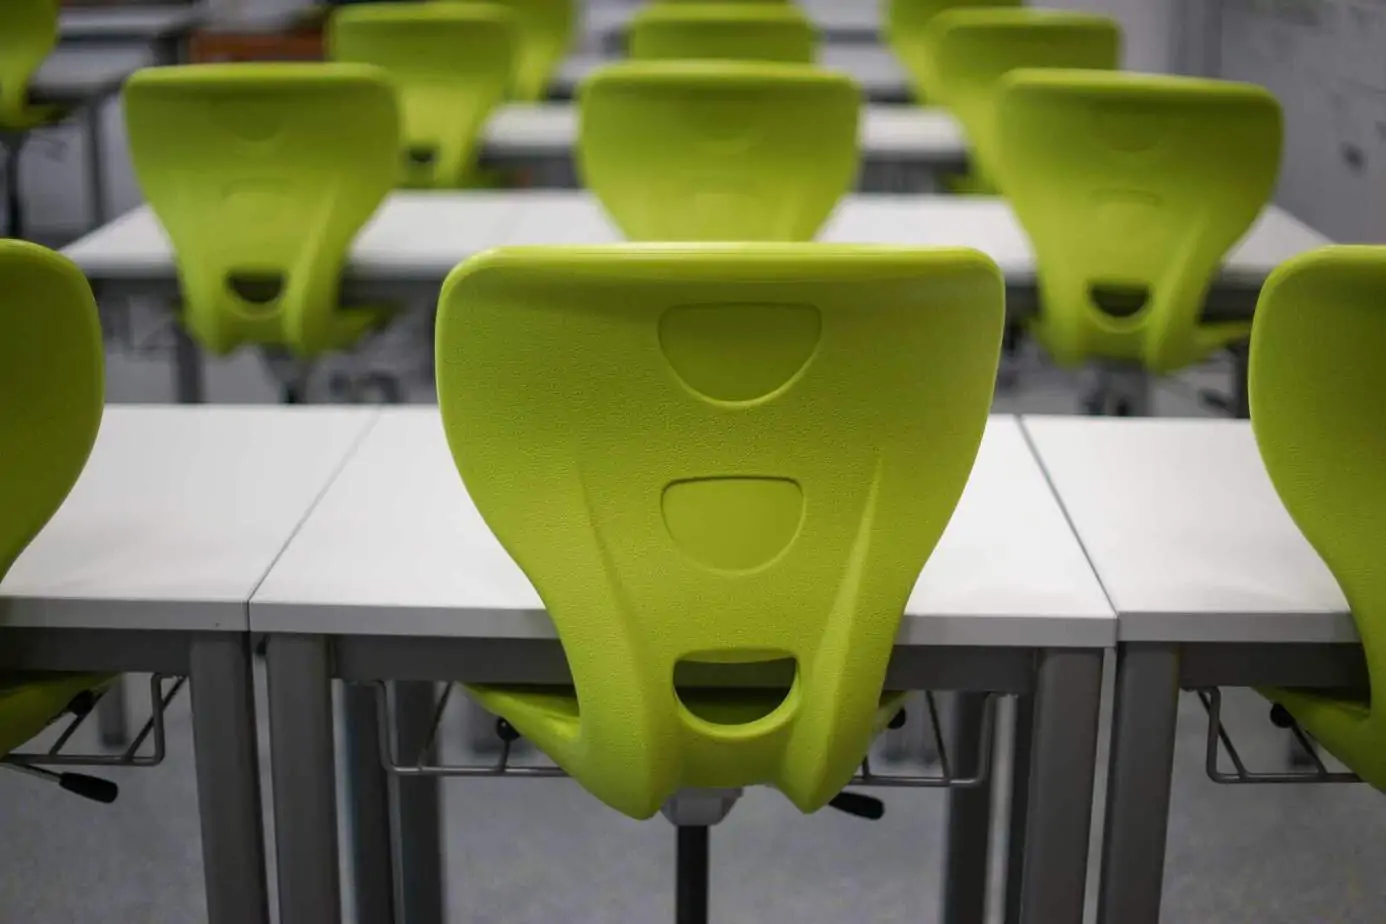 image of chairs assembled from BOM